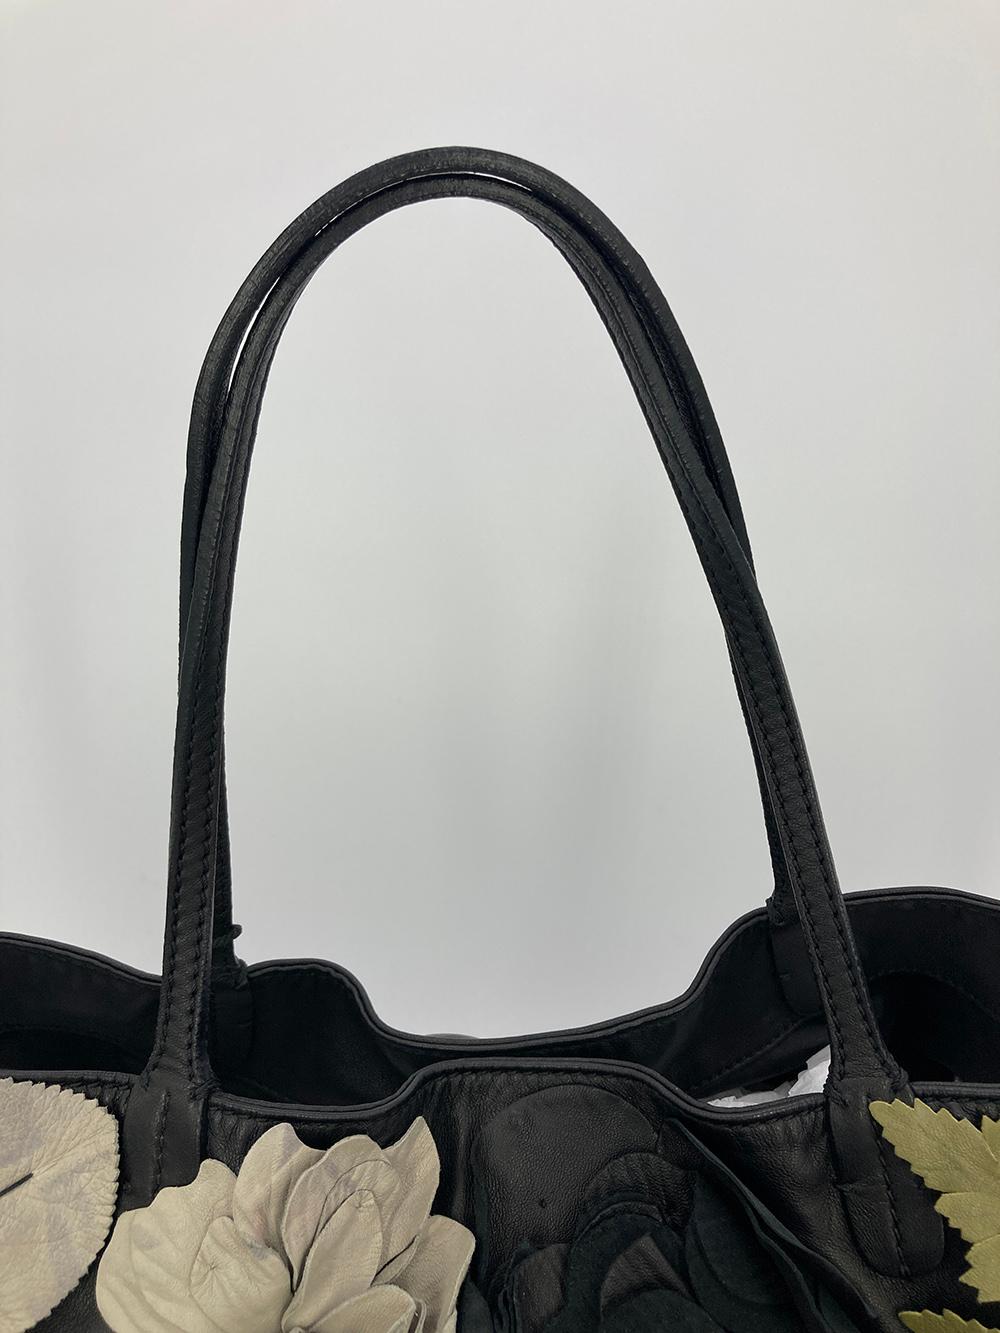 Valentino Leather Floral Embellished Tote For Sale 3